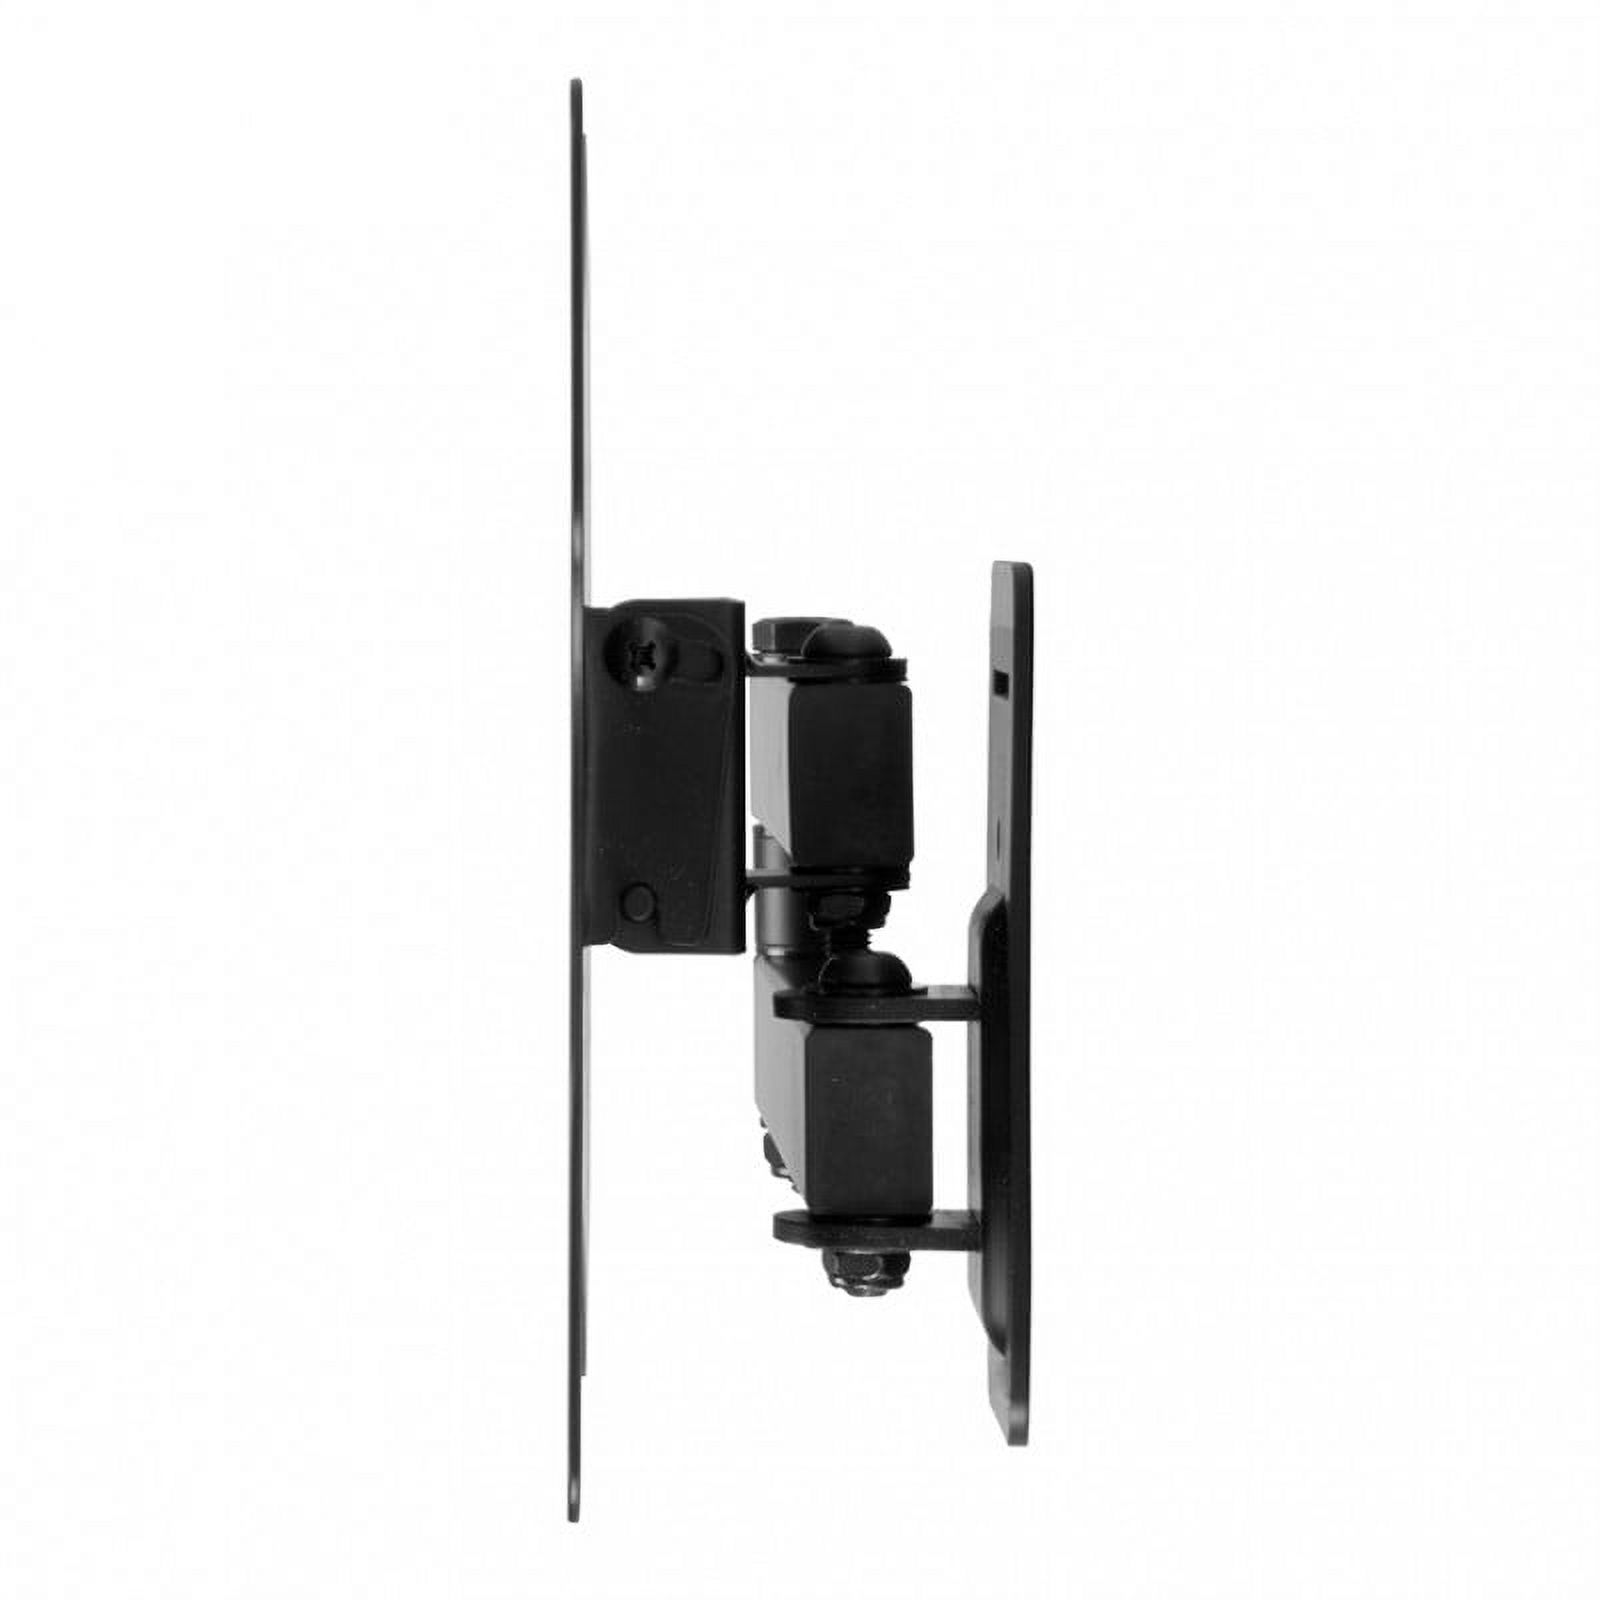 SWIFT240-AP Multi-Position TV Wall Mount for TVs up to 39-inch - image 2 of 3